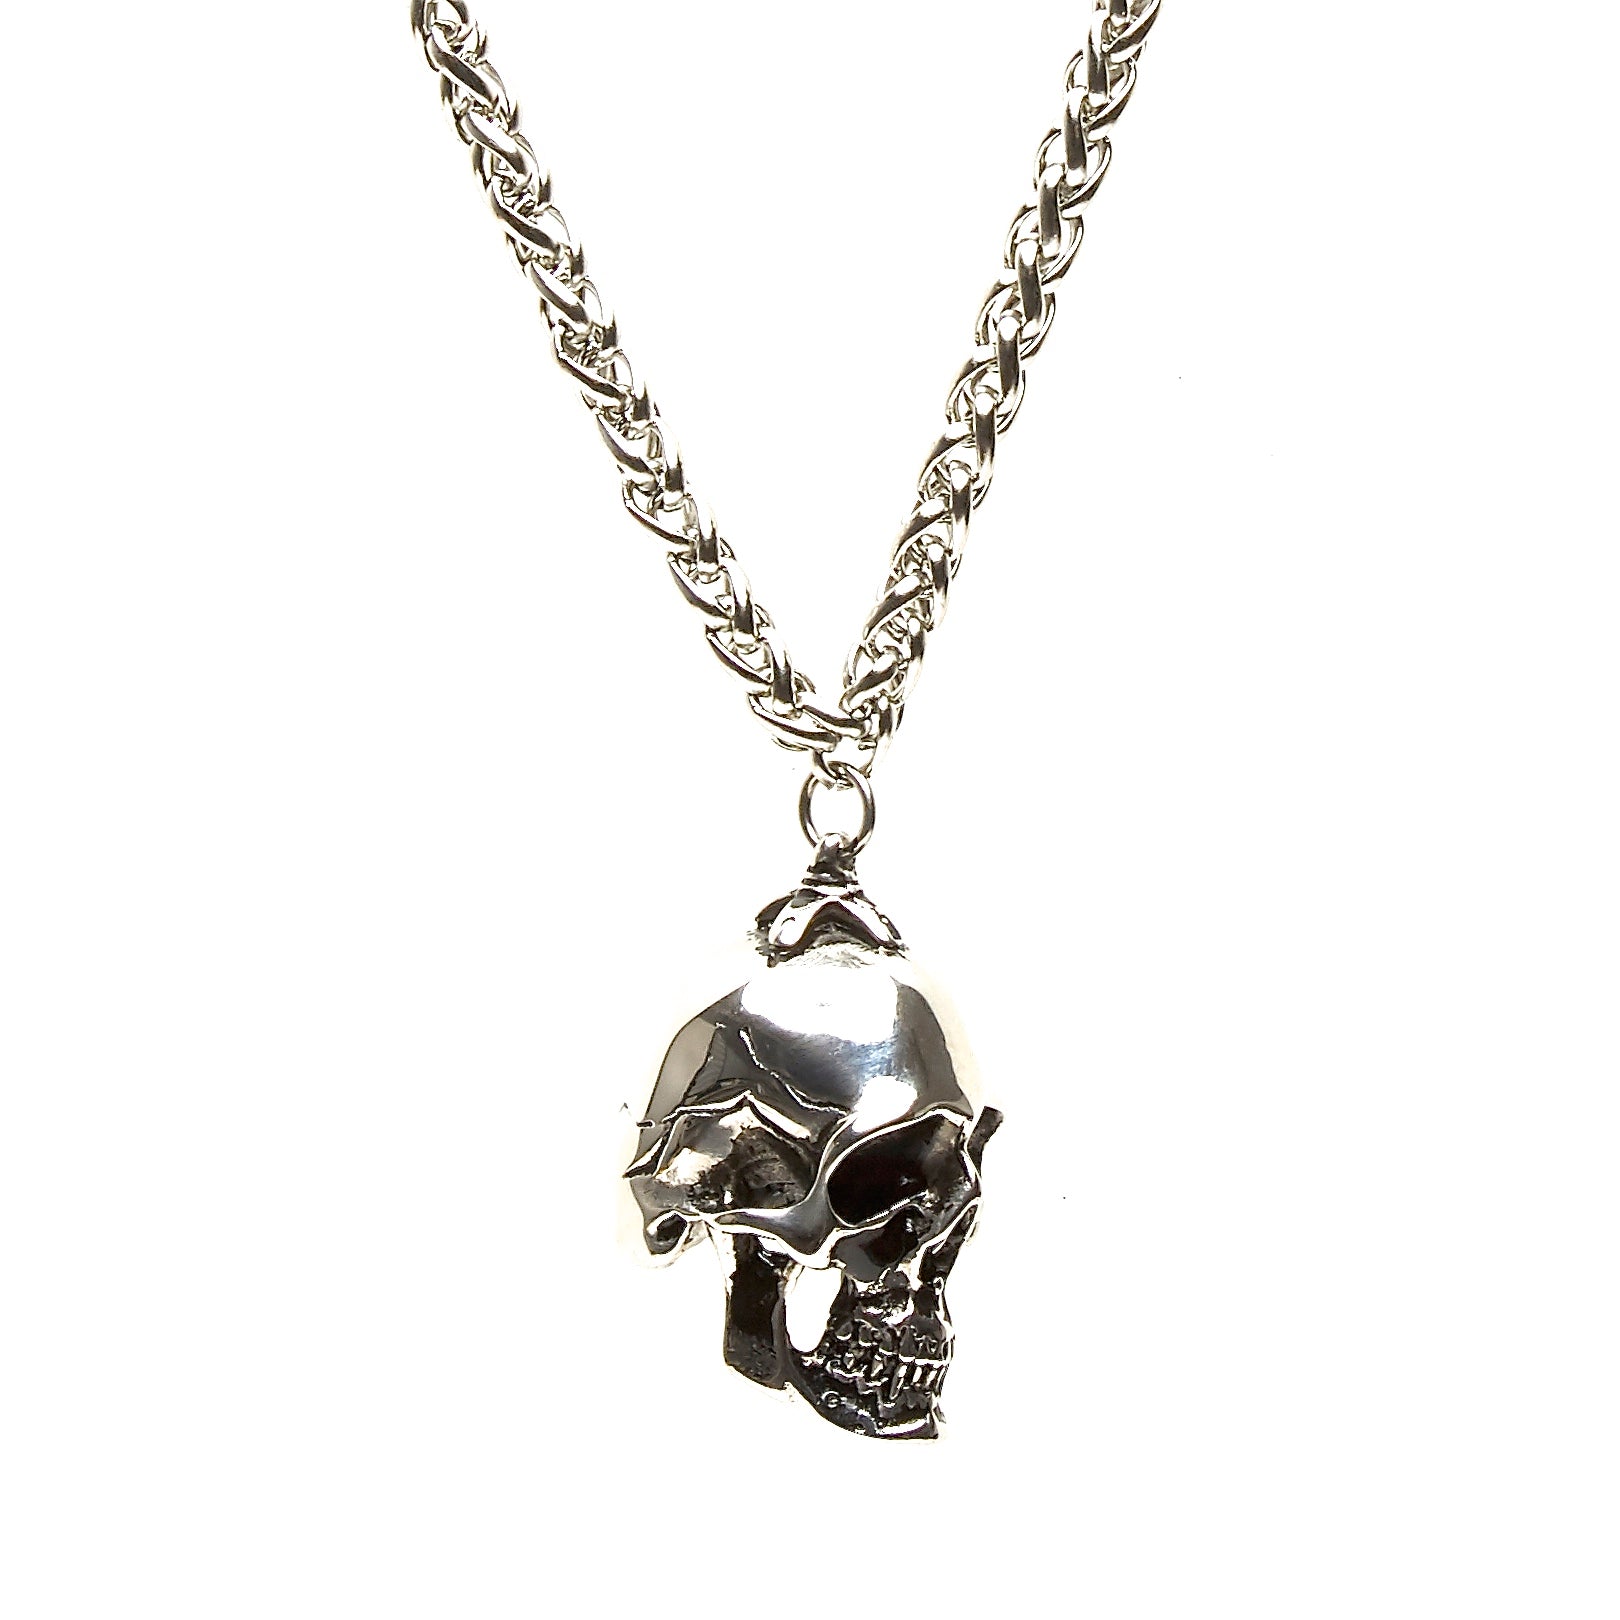 ROUND STAINLESS STEEL CHAIN NECKLACE WITH HEAVYWEIGHT SKULL PENDANT. by nyet jewelry.